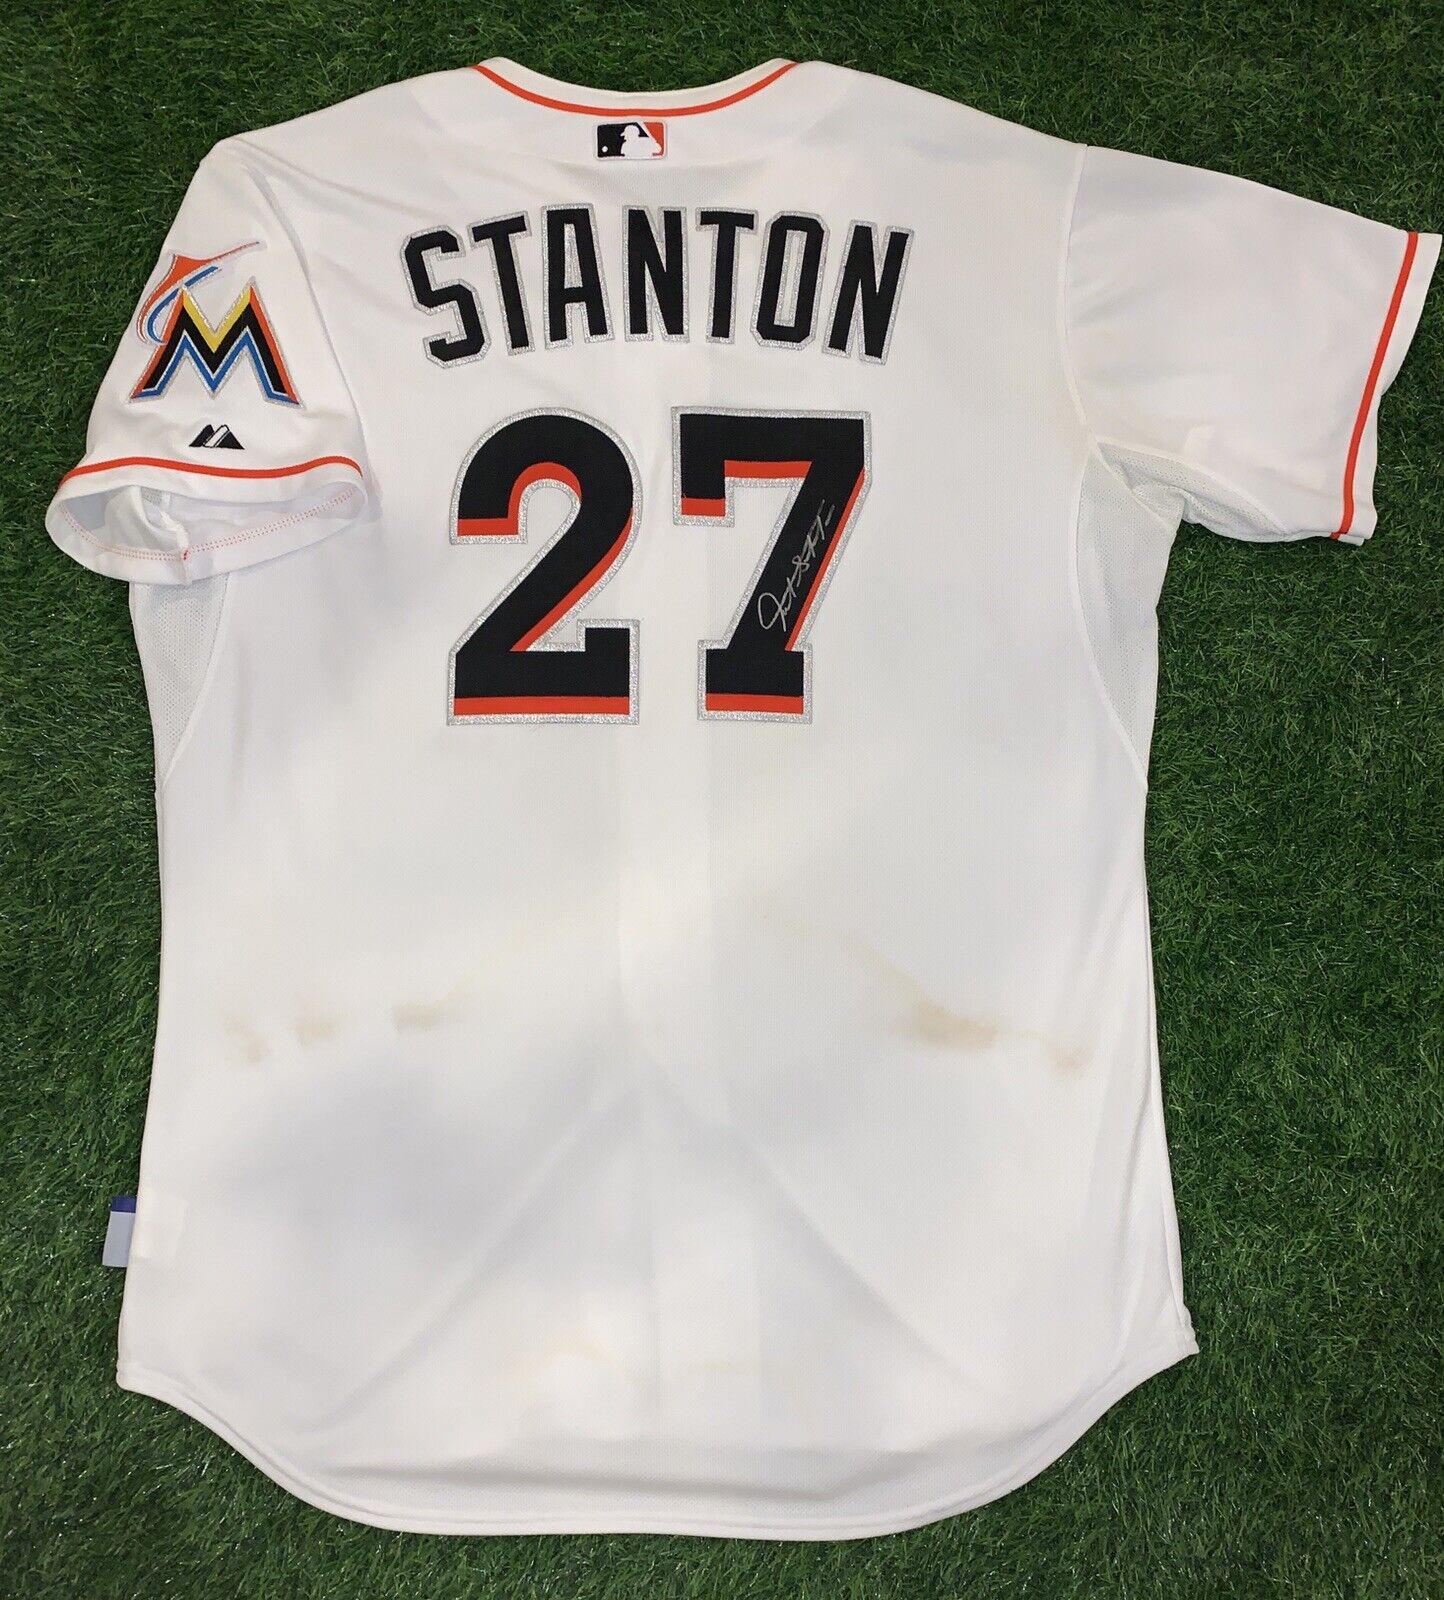 Giancarlo Stanton Marlins Game Used OFFer Jersey A 152nd MLB Purchase HR Career